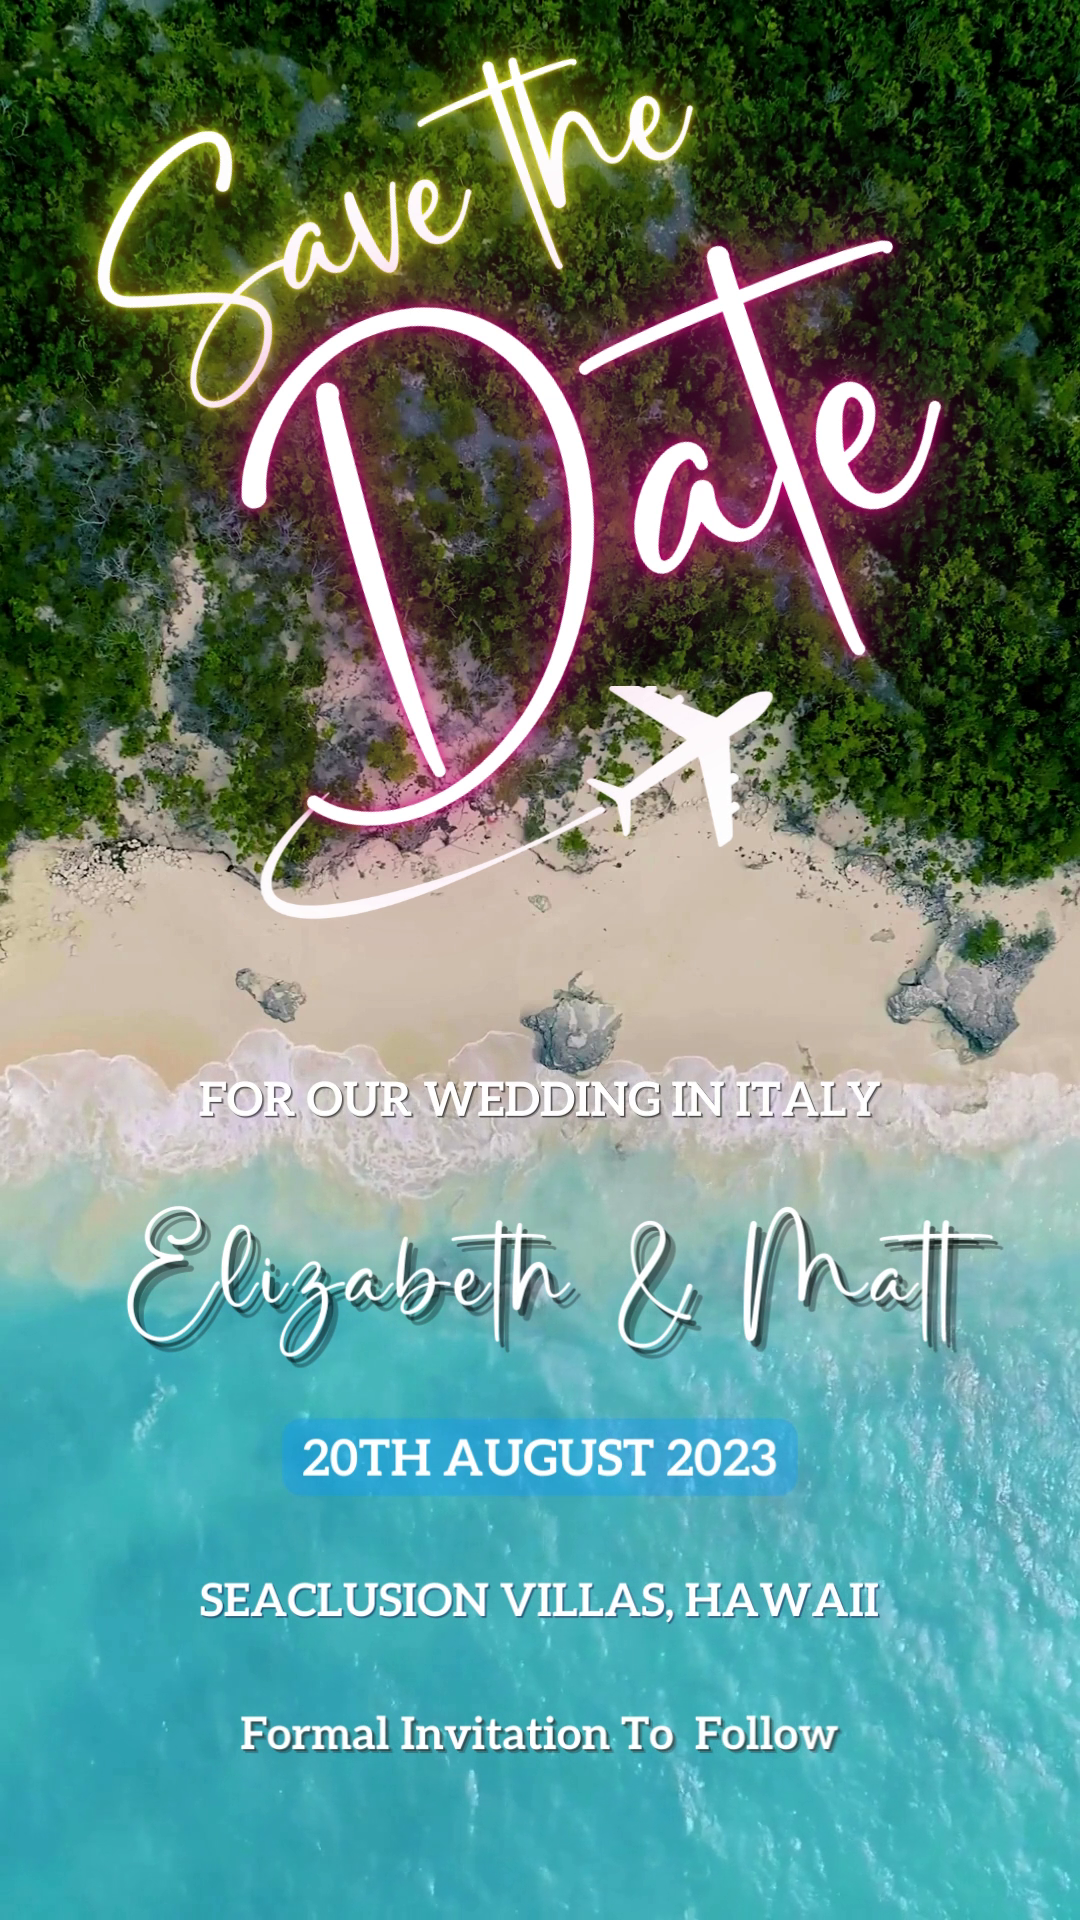 Exotic Beach Destination | Save The Date Video Invitation with customizable text, featuring a beach scene, airplane, and editable sign. Downloadable and editable via Canva.